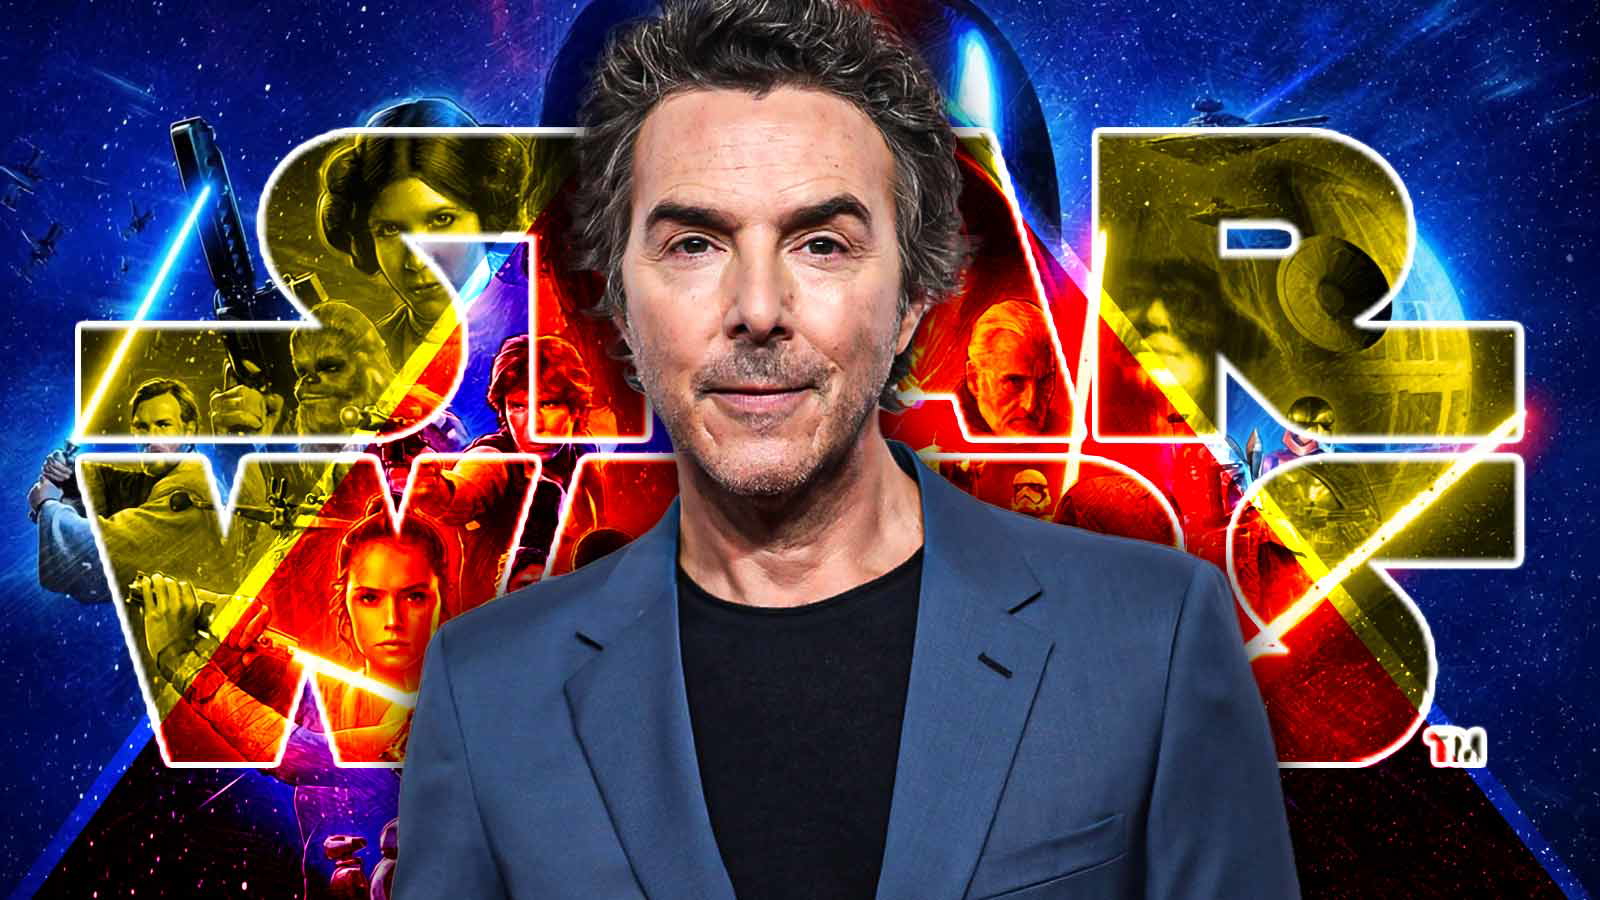 Shawn Levy’s Upcoming Star Wars Film Gets a Jaw-dropping Update That Proves George Lucas’ Franchise Could Soon Return to Its Glory Days